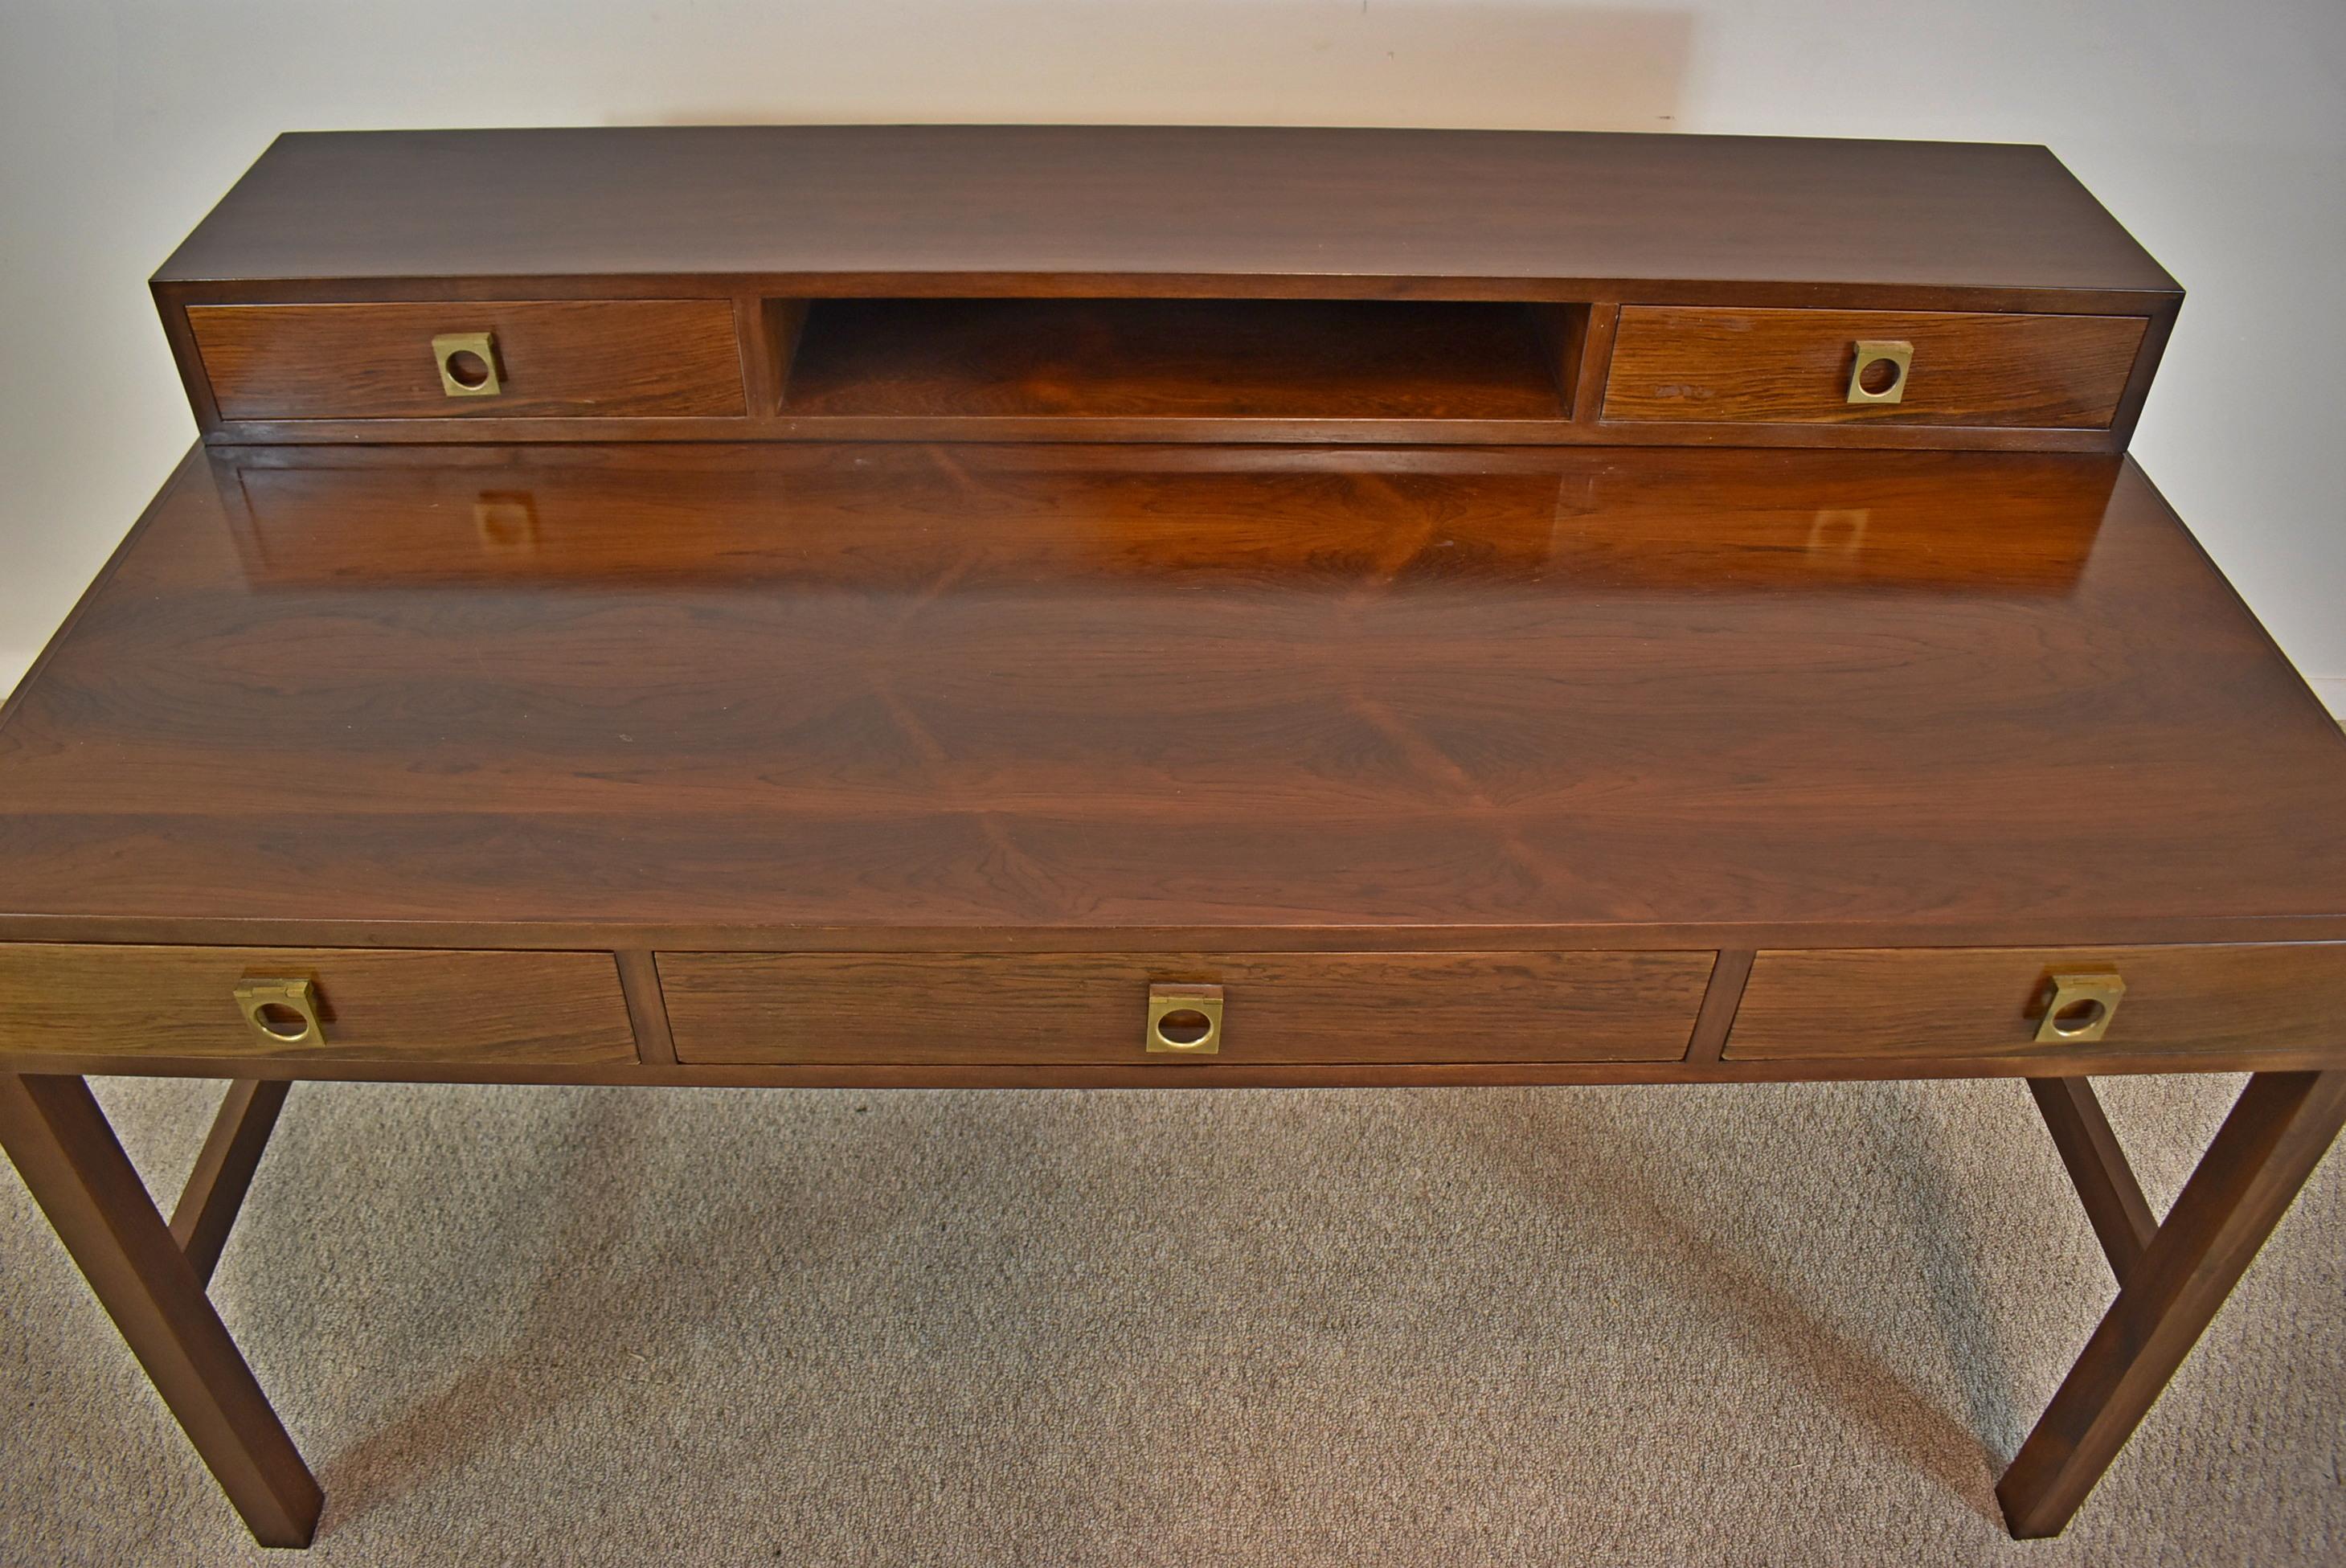 Arne Vodder rosewood desk. circa 1960s. Rosewood writing desk with a hinged fliptop to convert the desk into a partner's desk. Dovetailed drawers and brass hardware in Vodder style. Great condition, some wear consistent with usage and age.